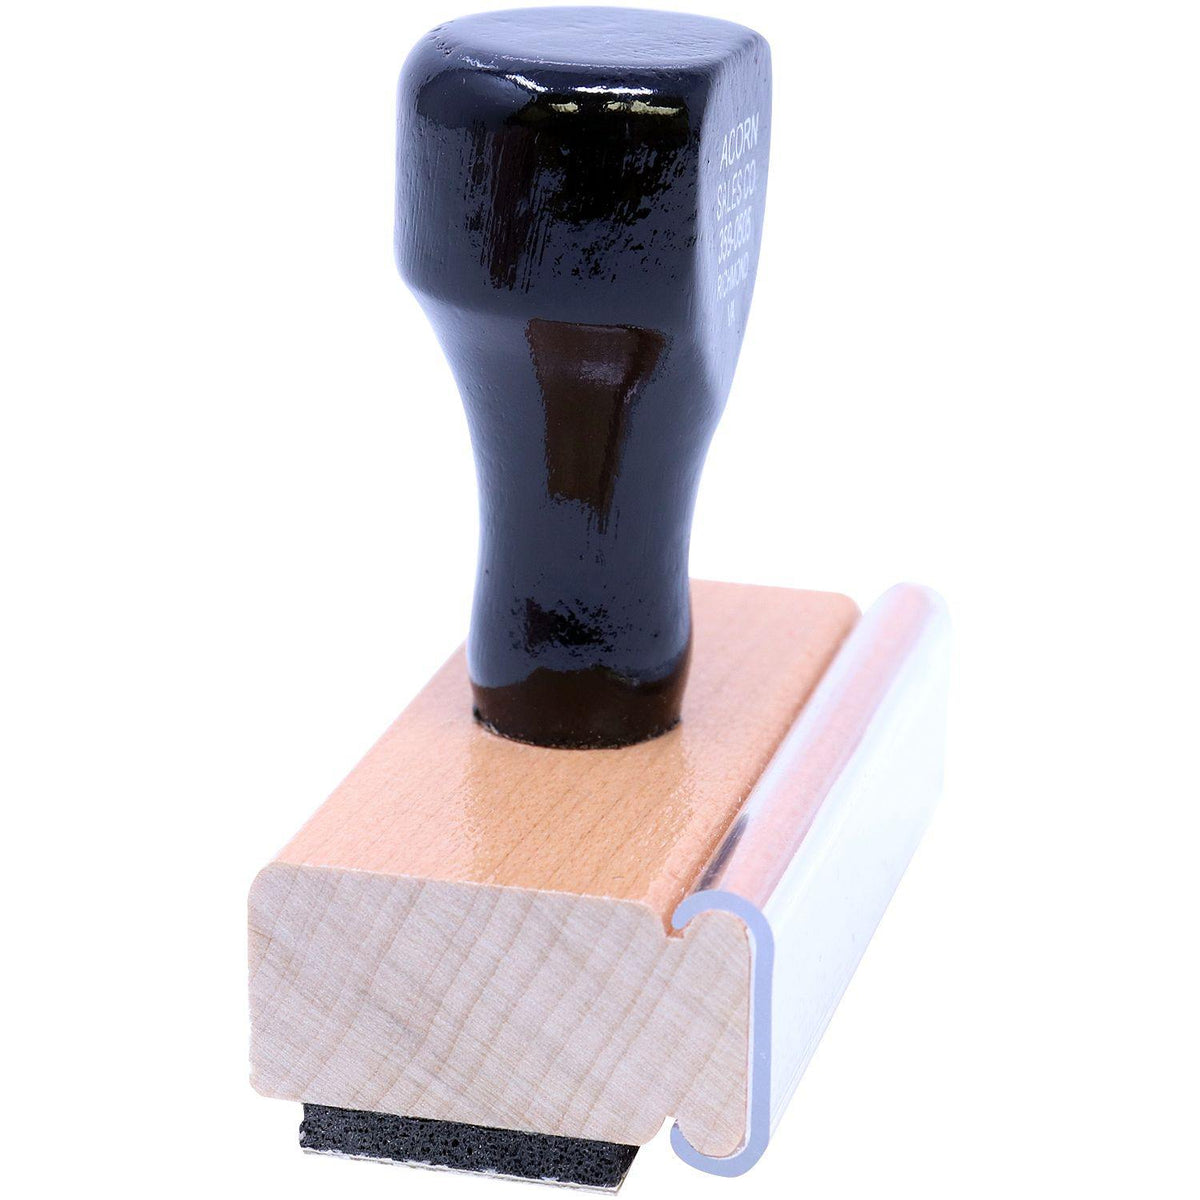 Side View of Correct And Hand Back To Teacher Rubber Stamp at an Angle